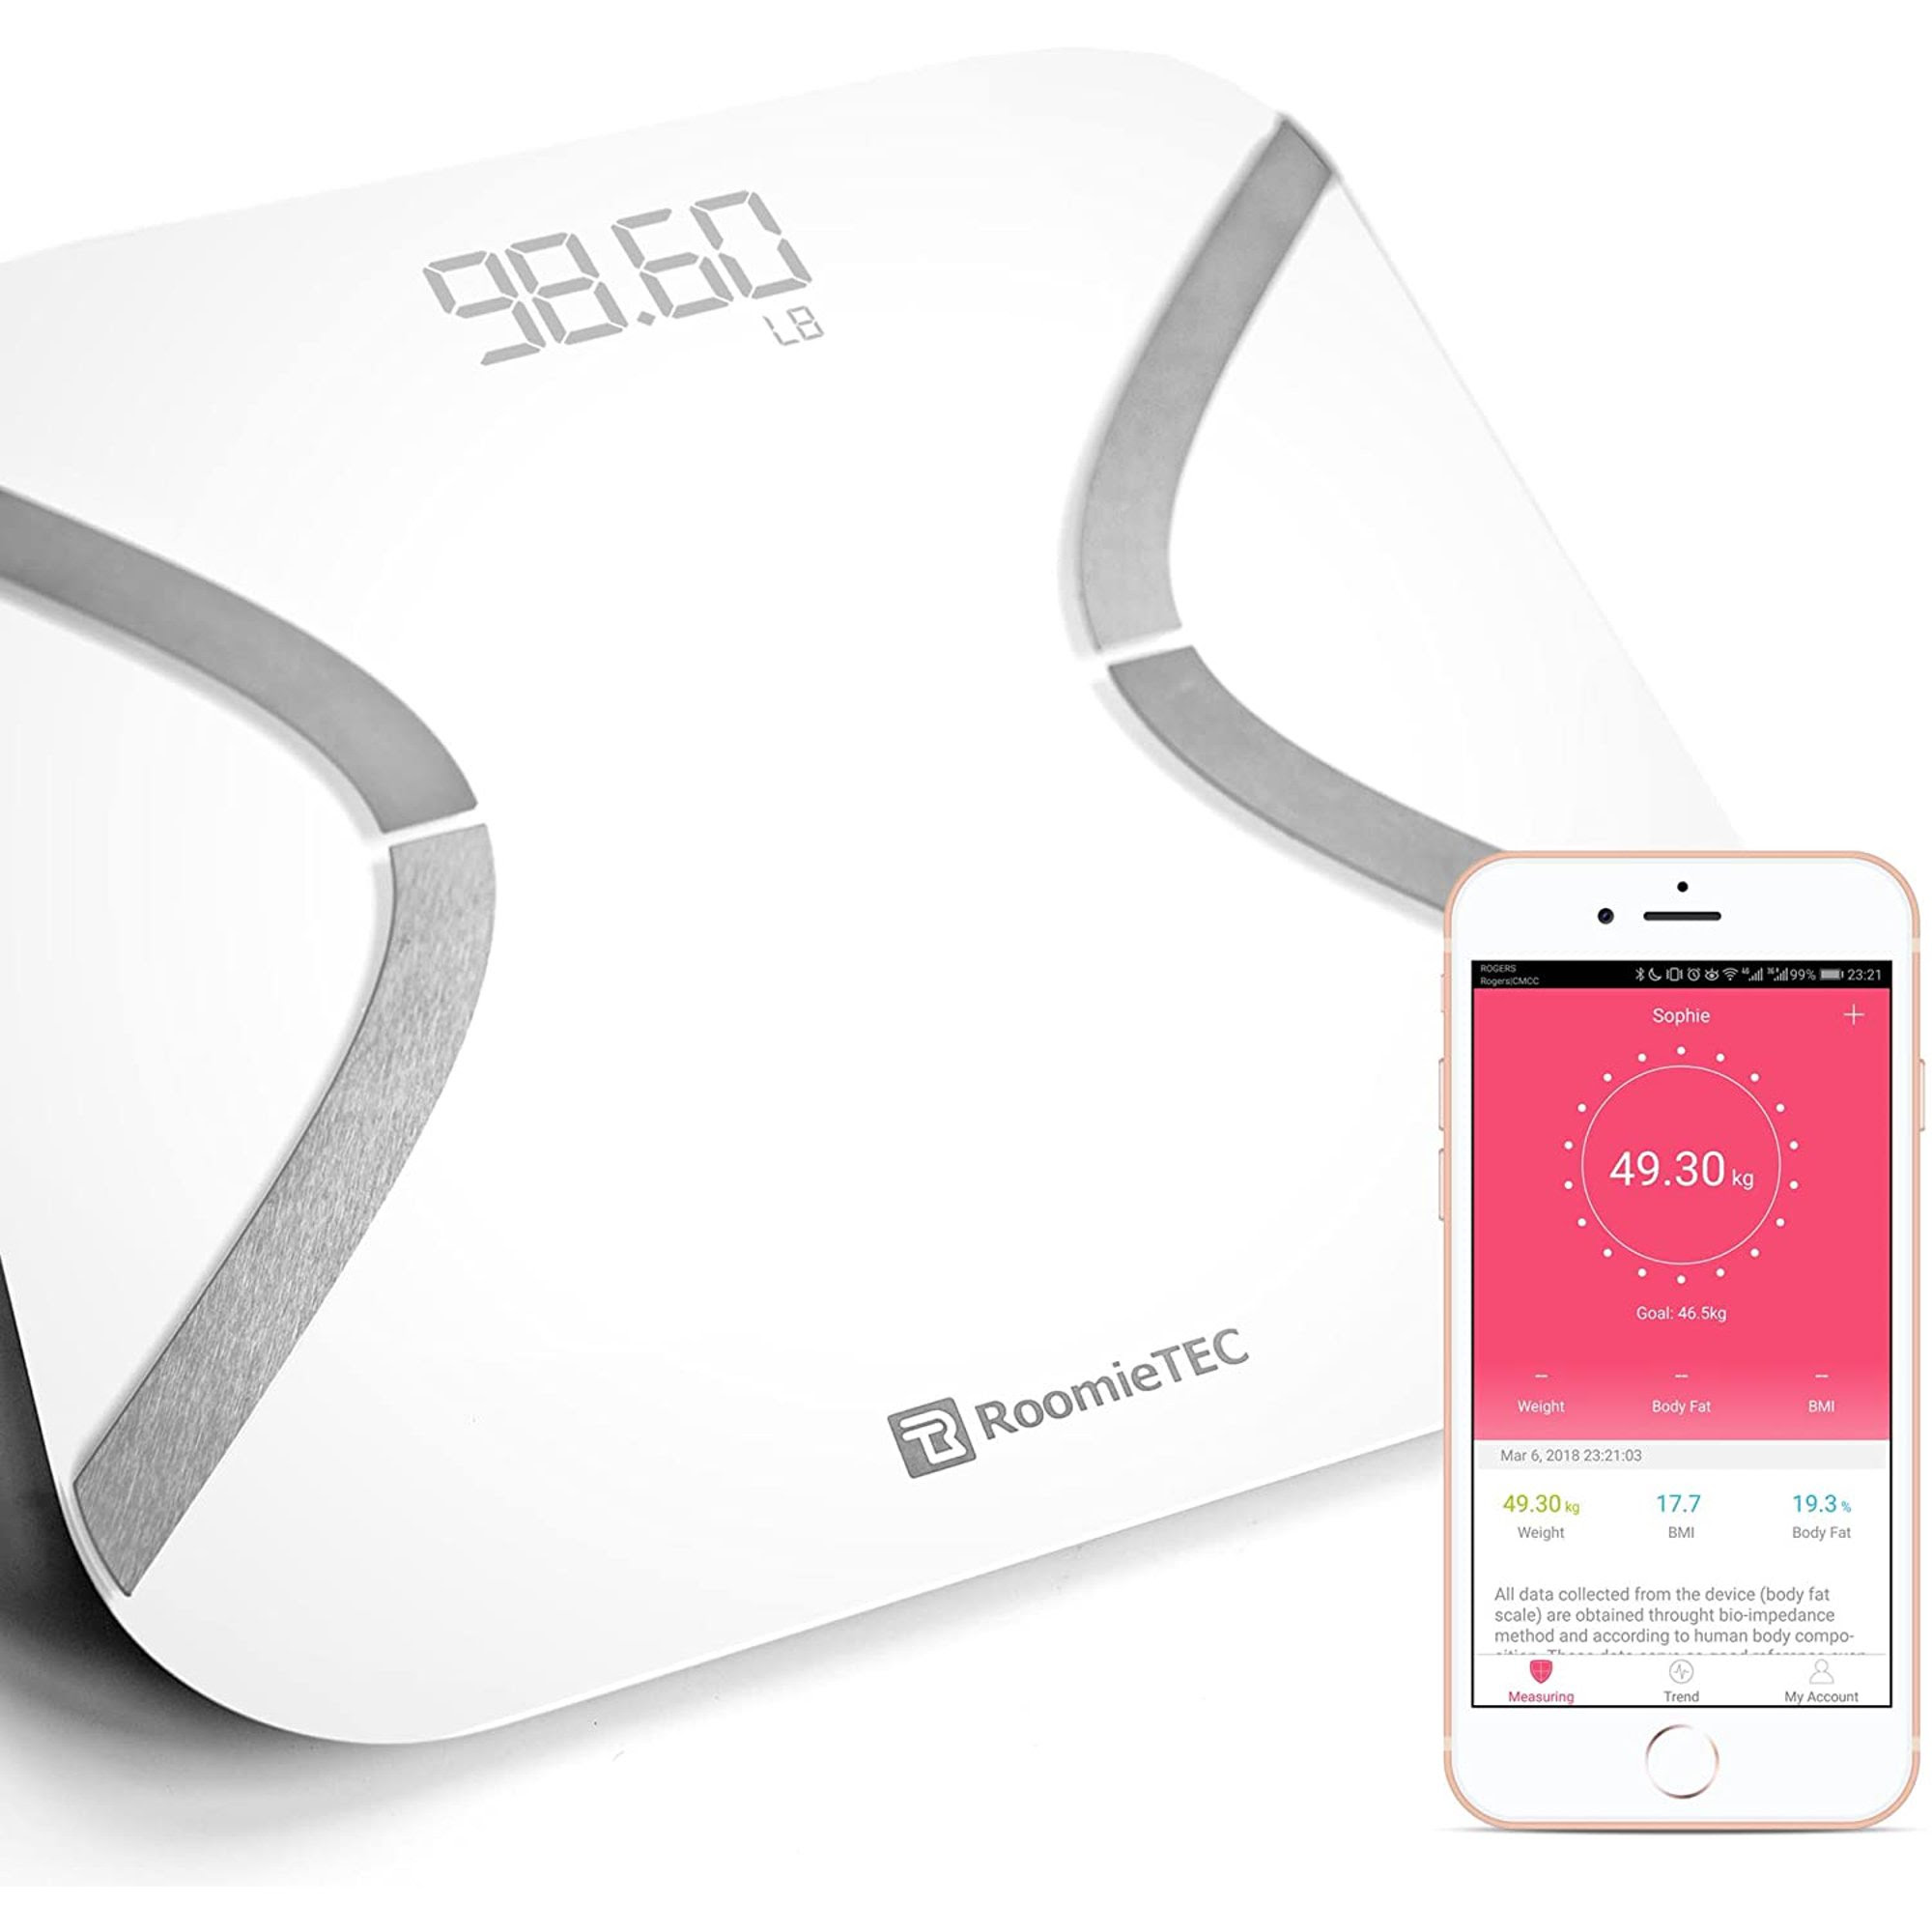 Roomie TEC Sophie Smart Body Scale with Free APP. 2,500 units. EXW Los Angeles $8.00 unit.